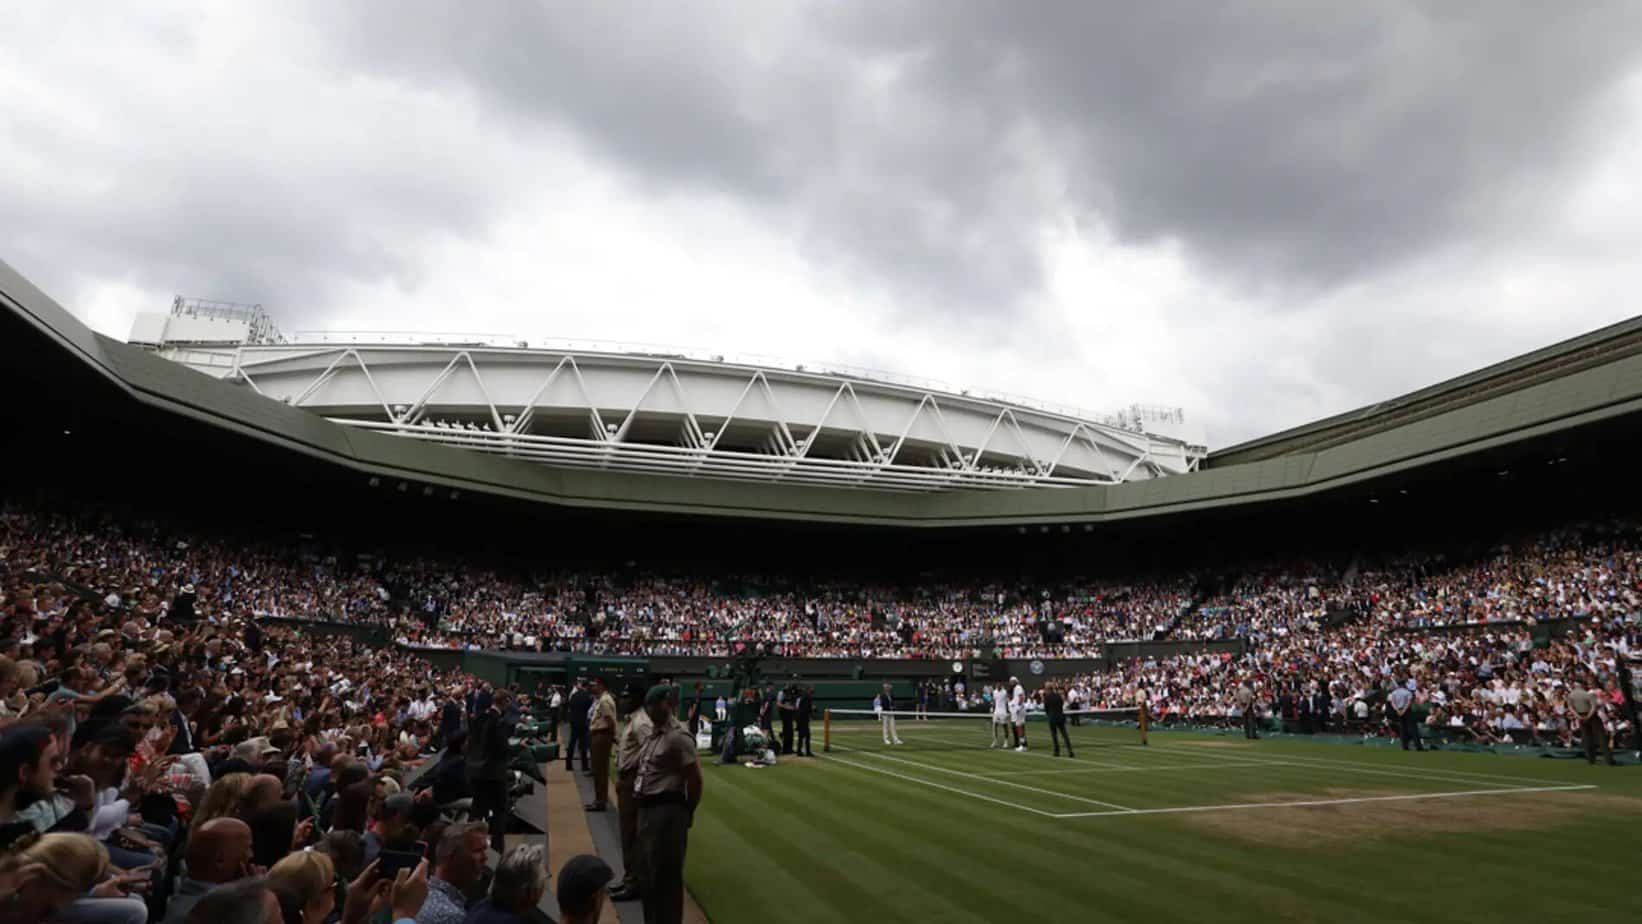 Wimbledon 2022 – Preview and Betting Odds